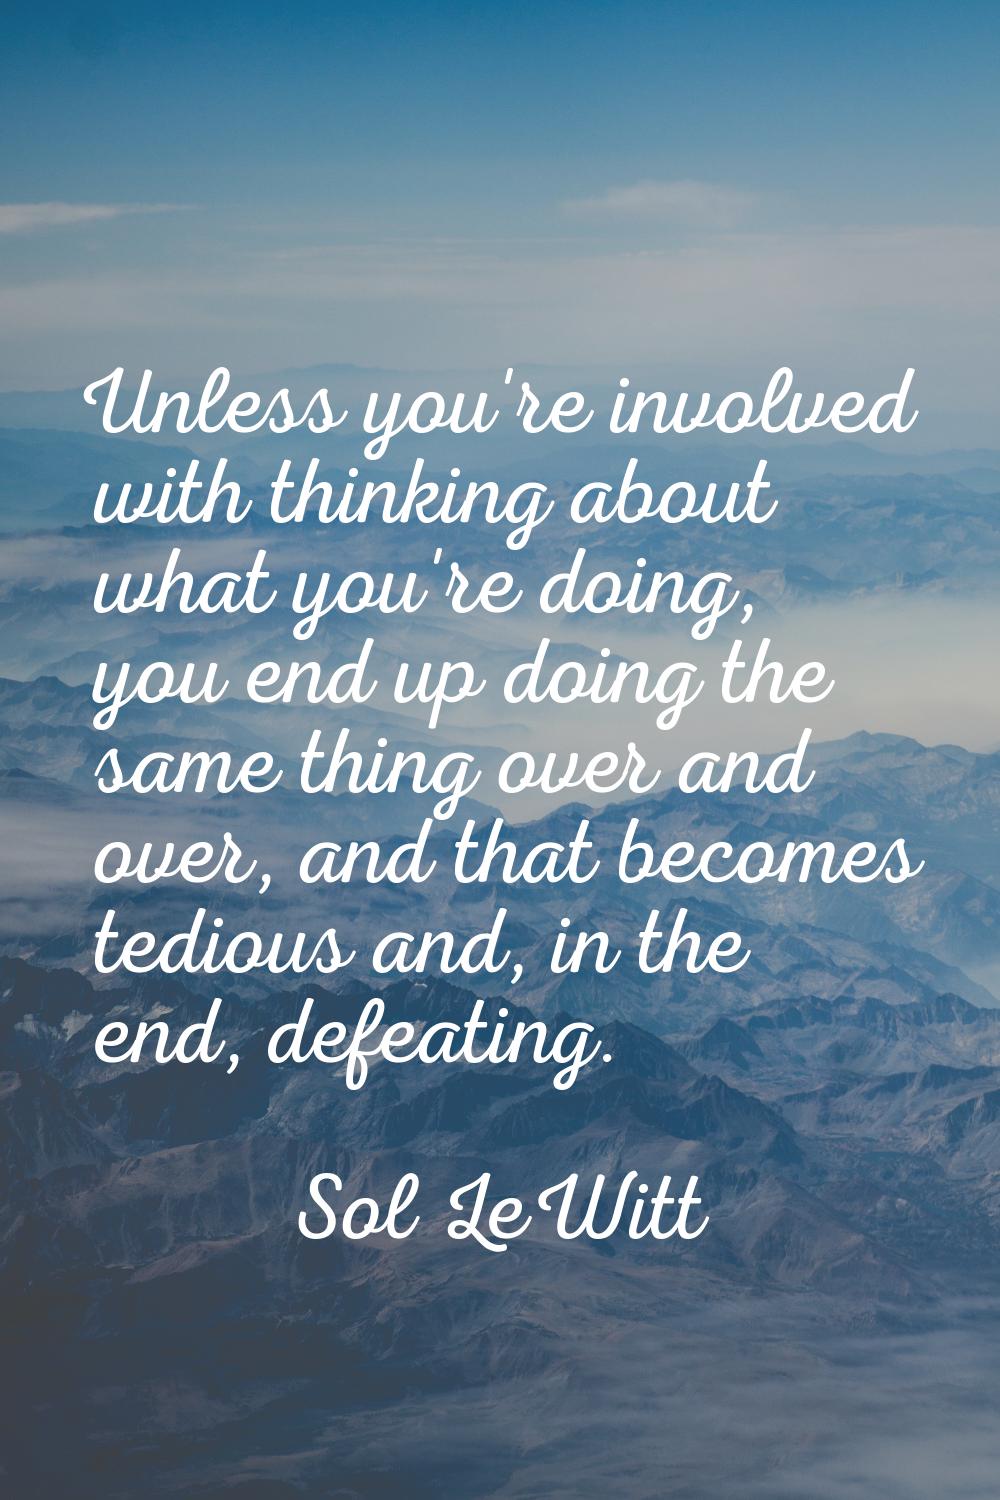 Unless you're involved with thinking about what you're doing, you end up doing the same thing over 